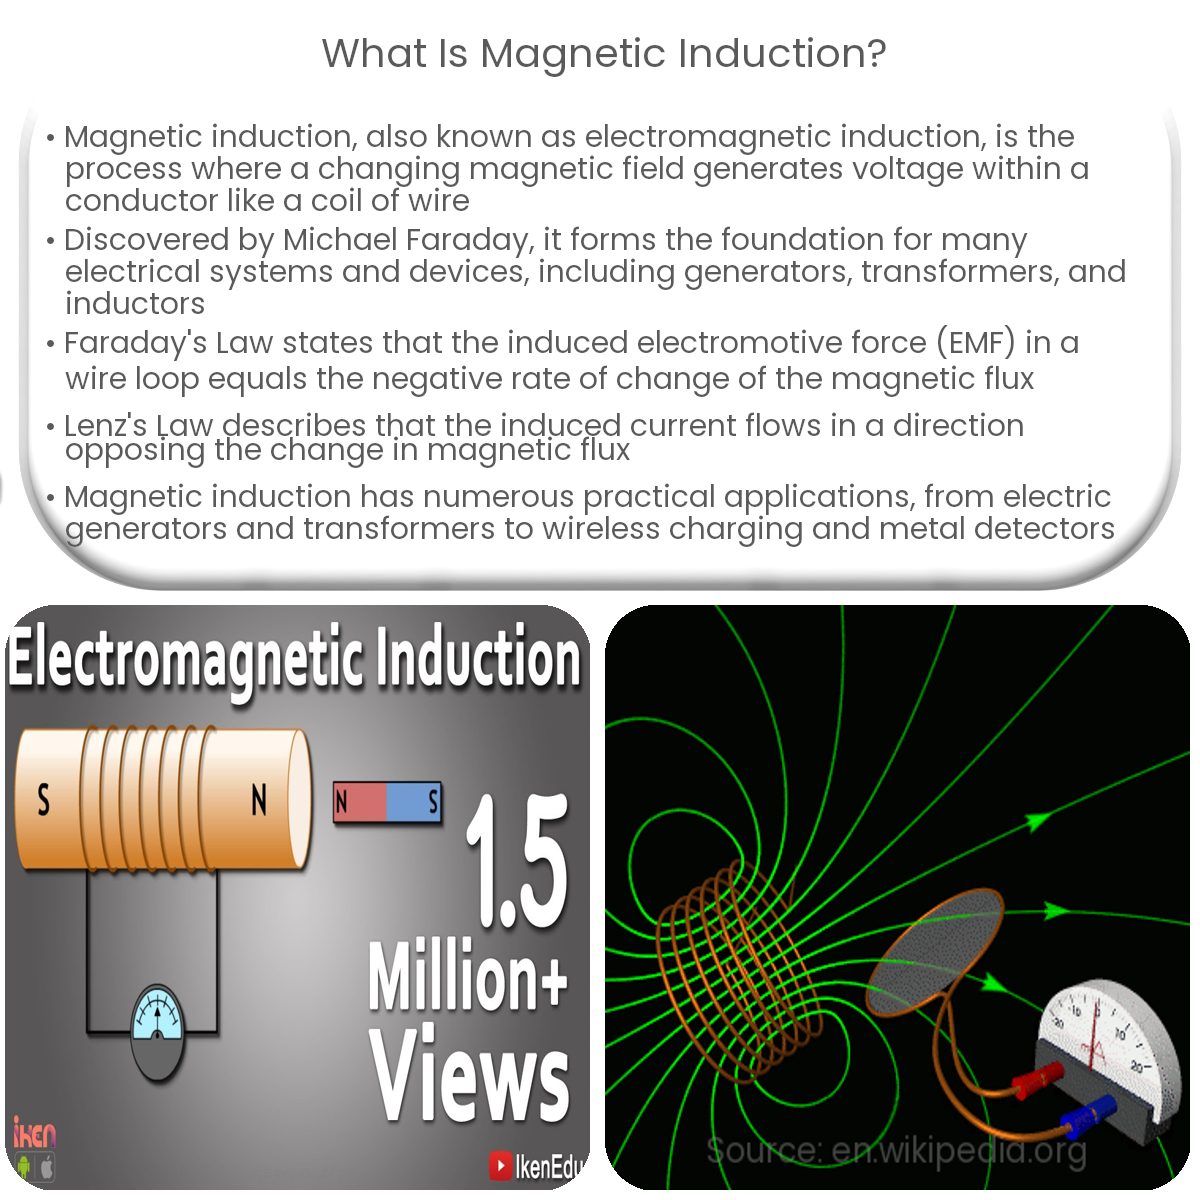 What is magnetic induction?